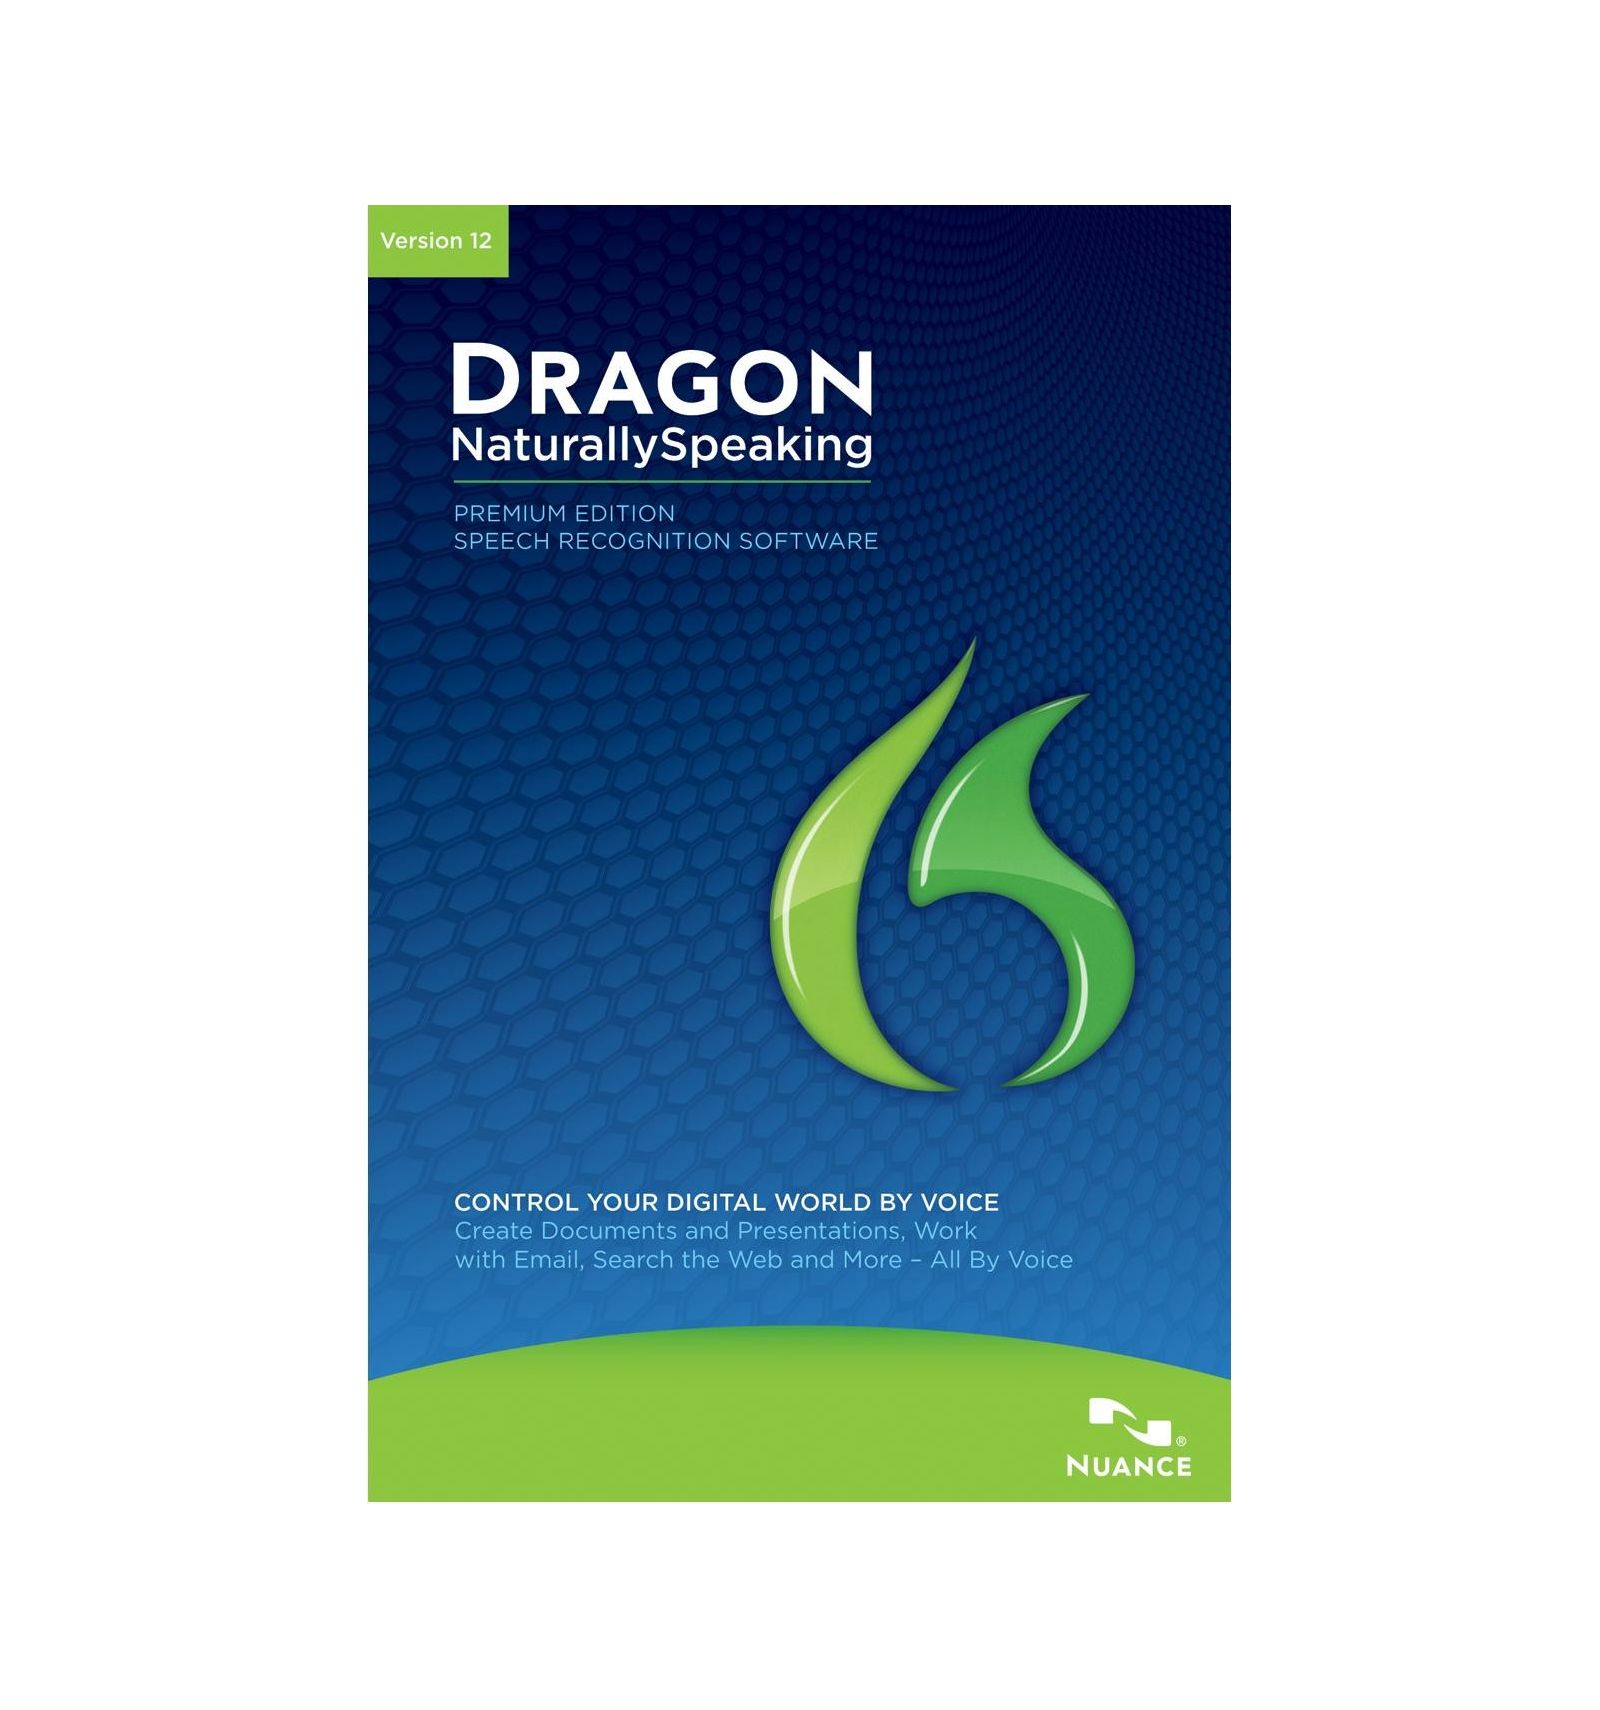 dragon naturally speaking software downloa